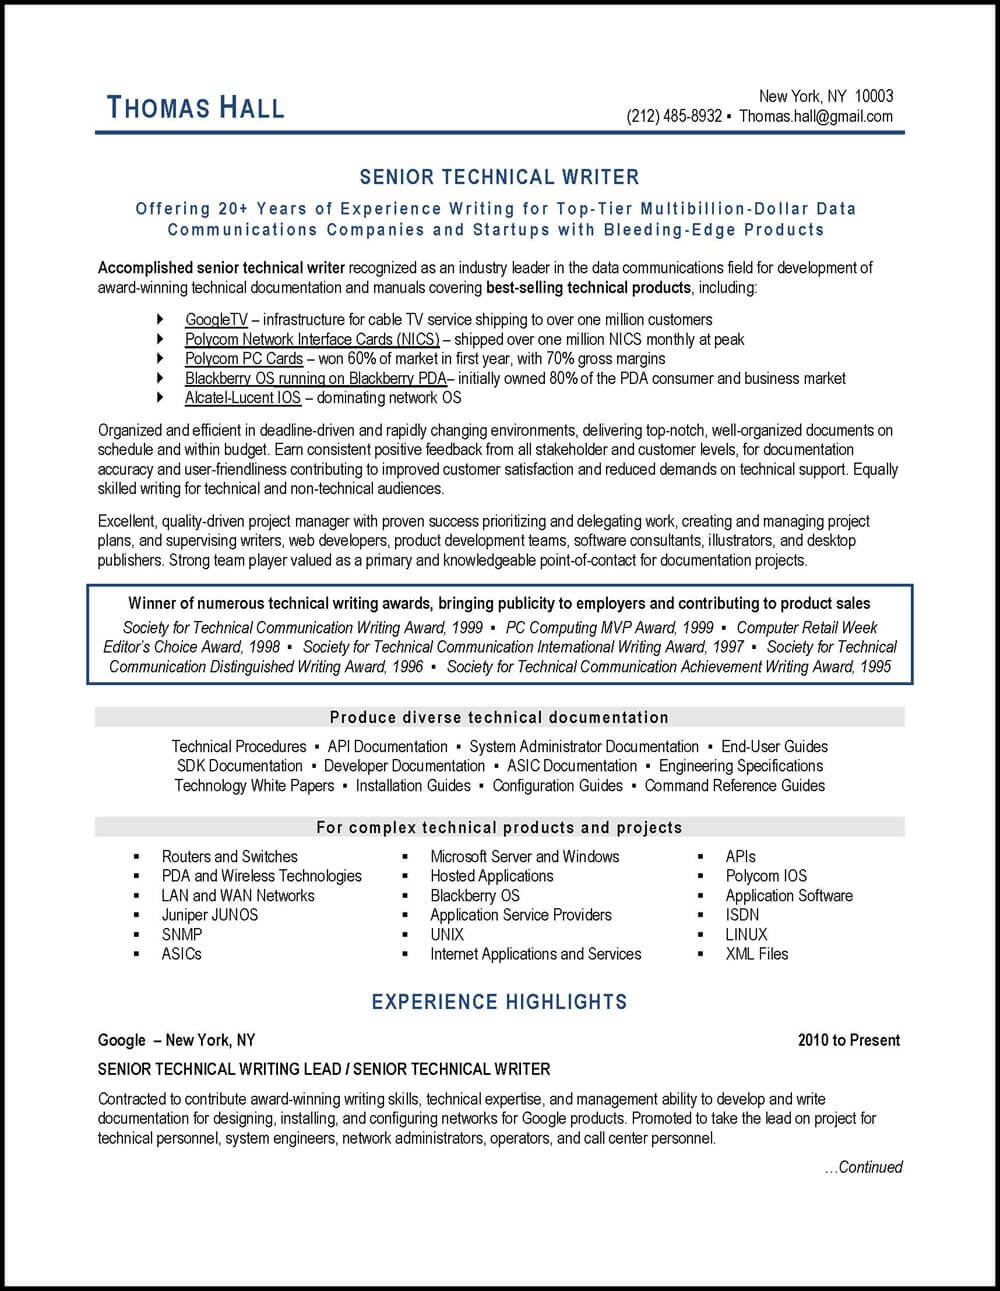 How To Write A Resume Technical Writer Resume Page 1 how to write a resume|wikiresume.com